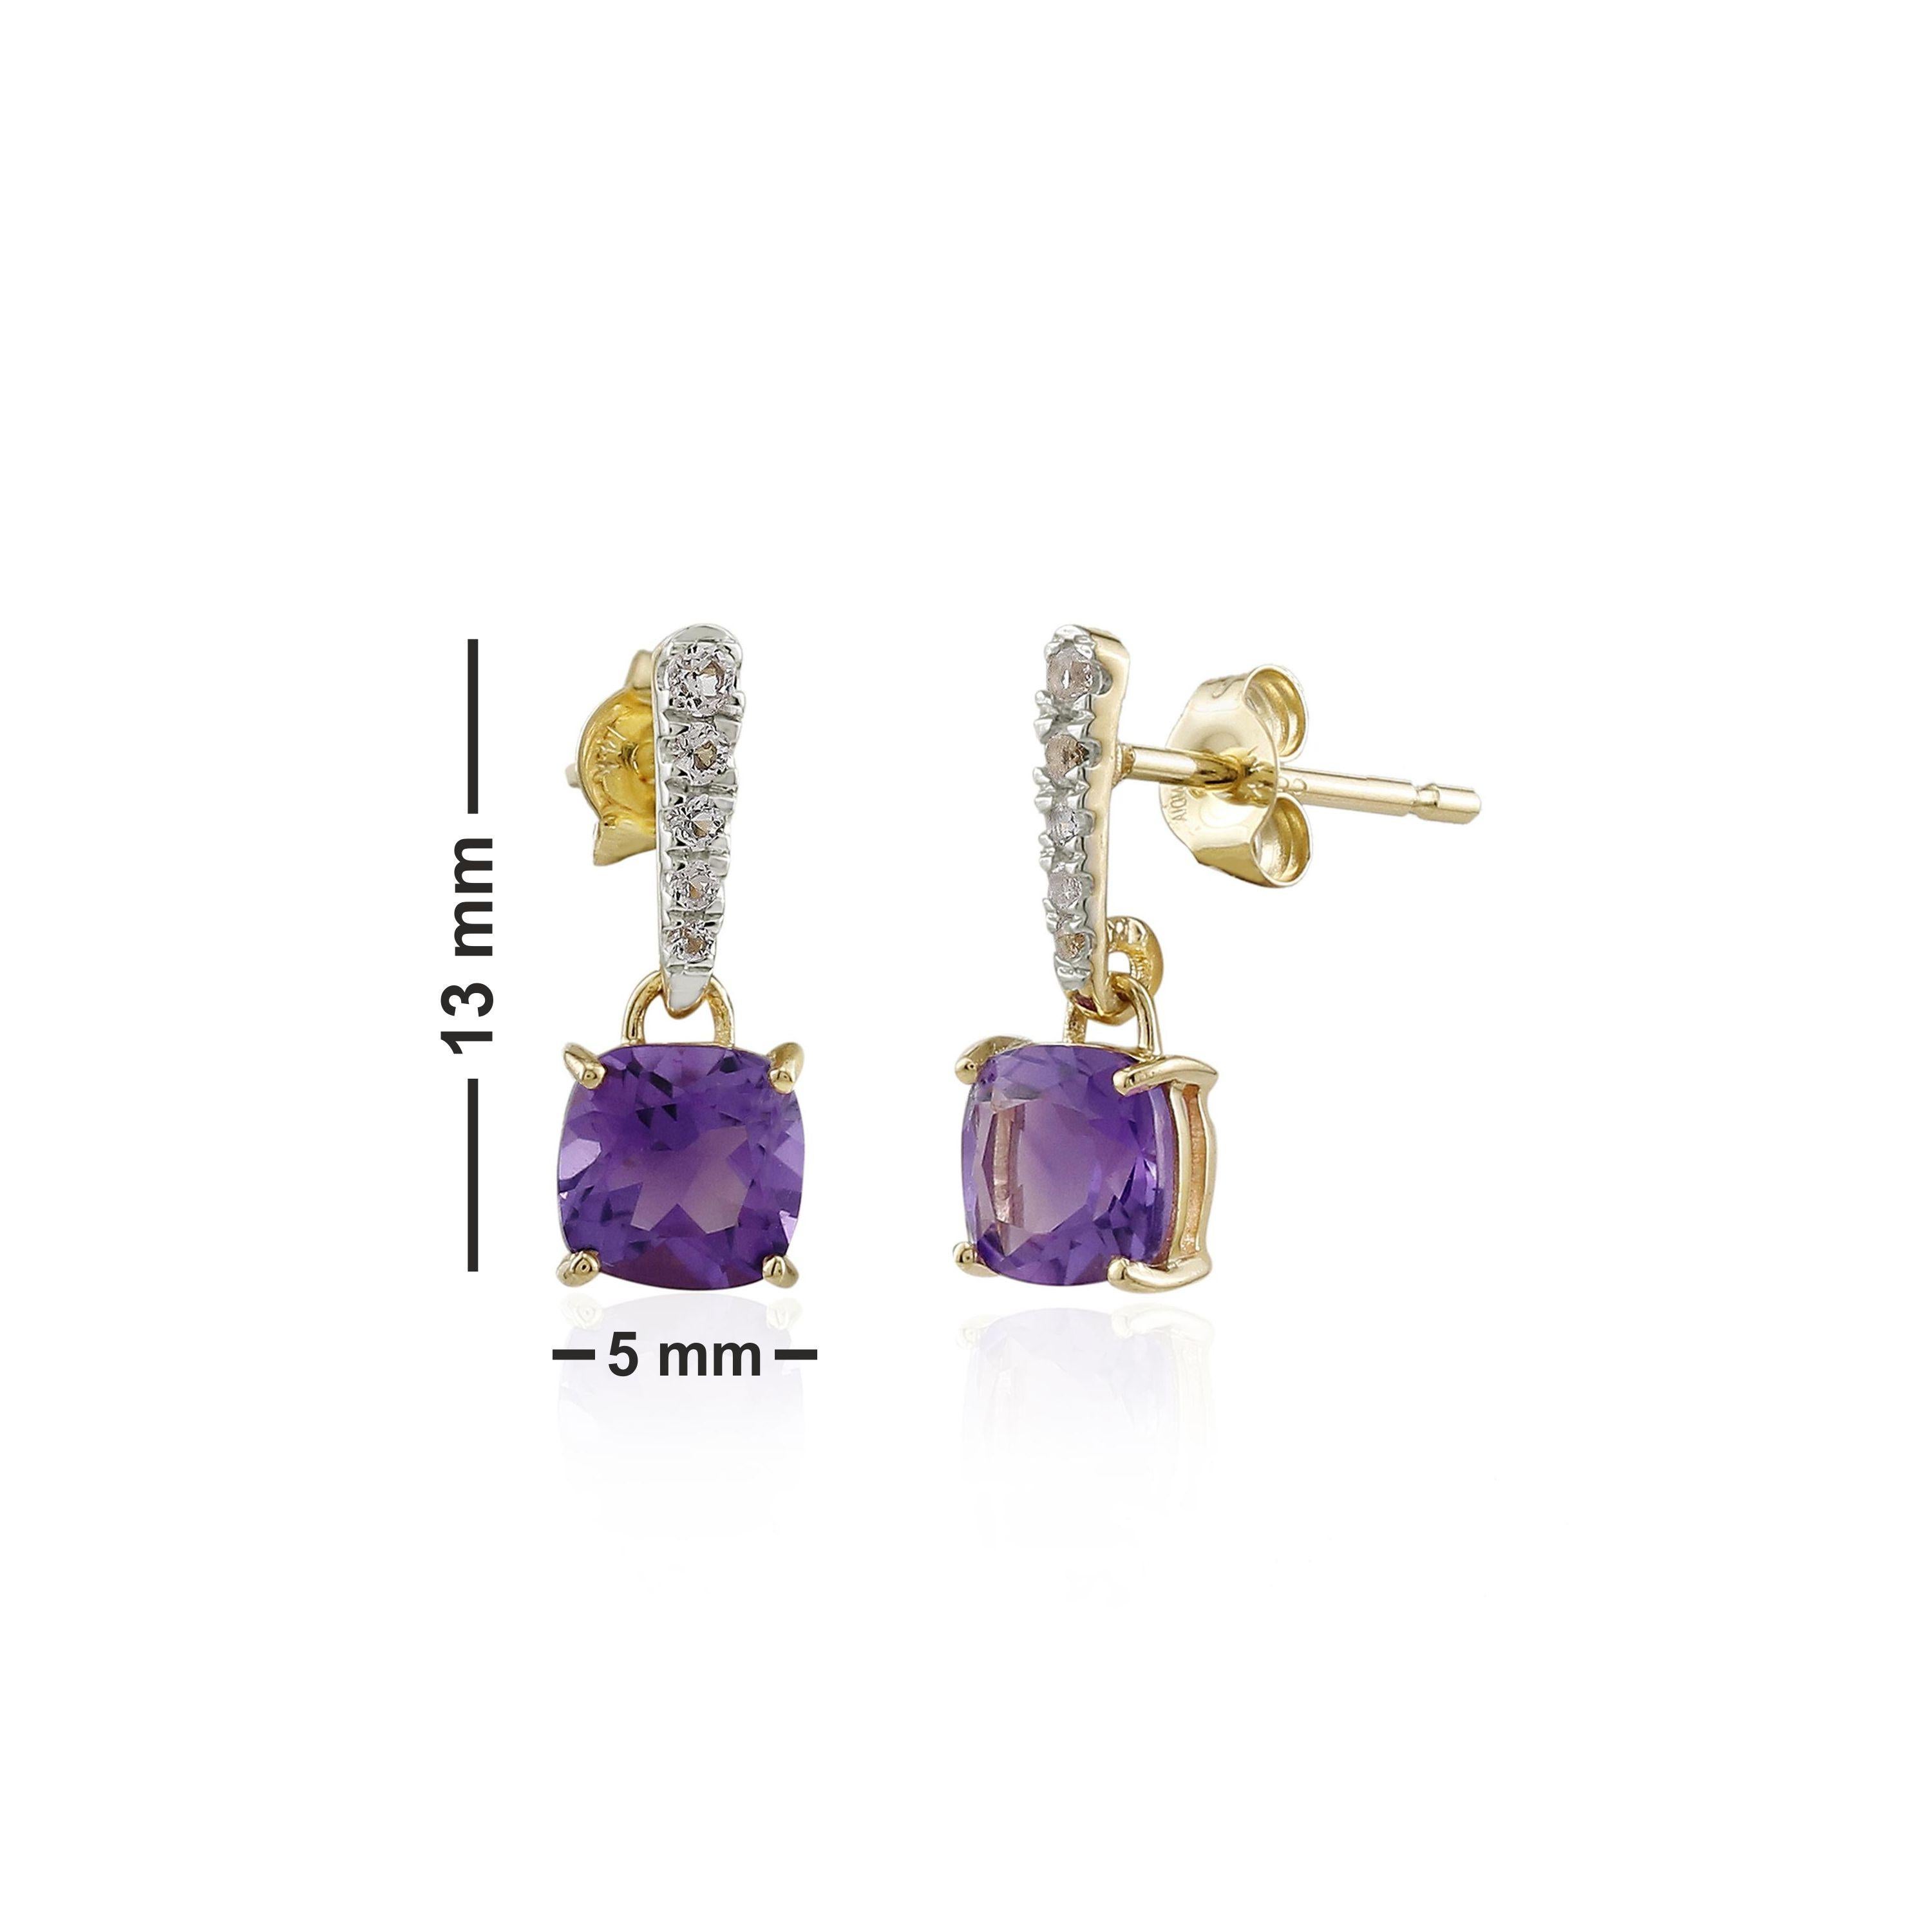 Women's Gemistry 1.1 Cts. Cushion Amethyst and 0.16 Cts. Topaz Drop Earrings in 14K Gold